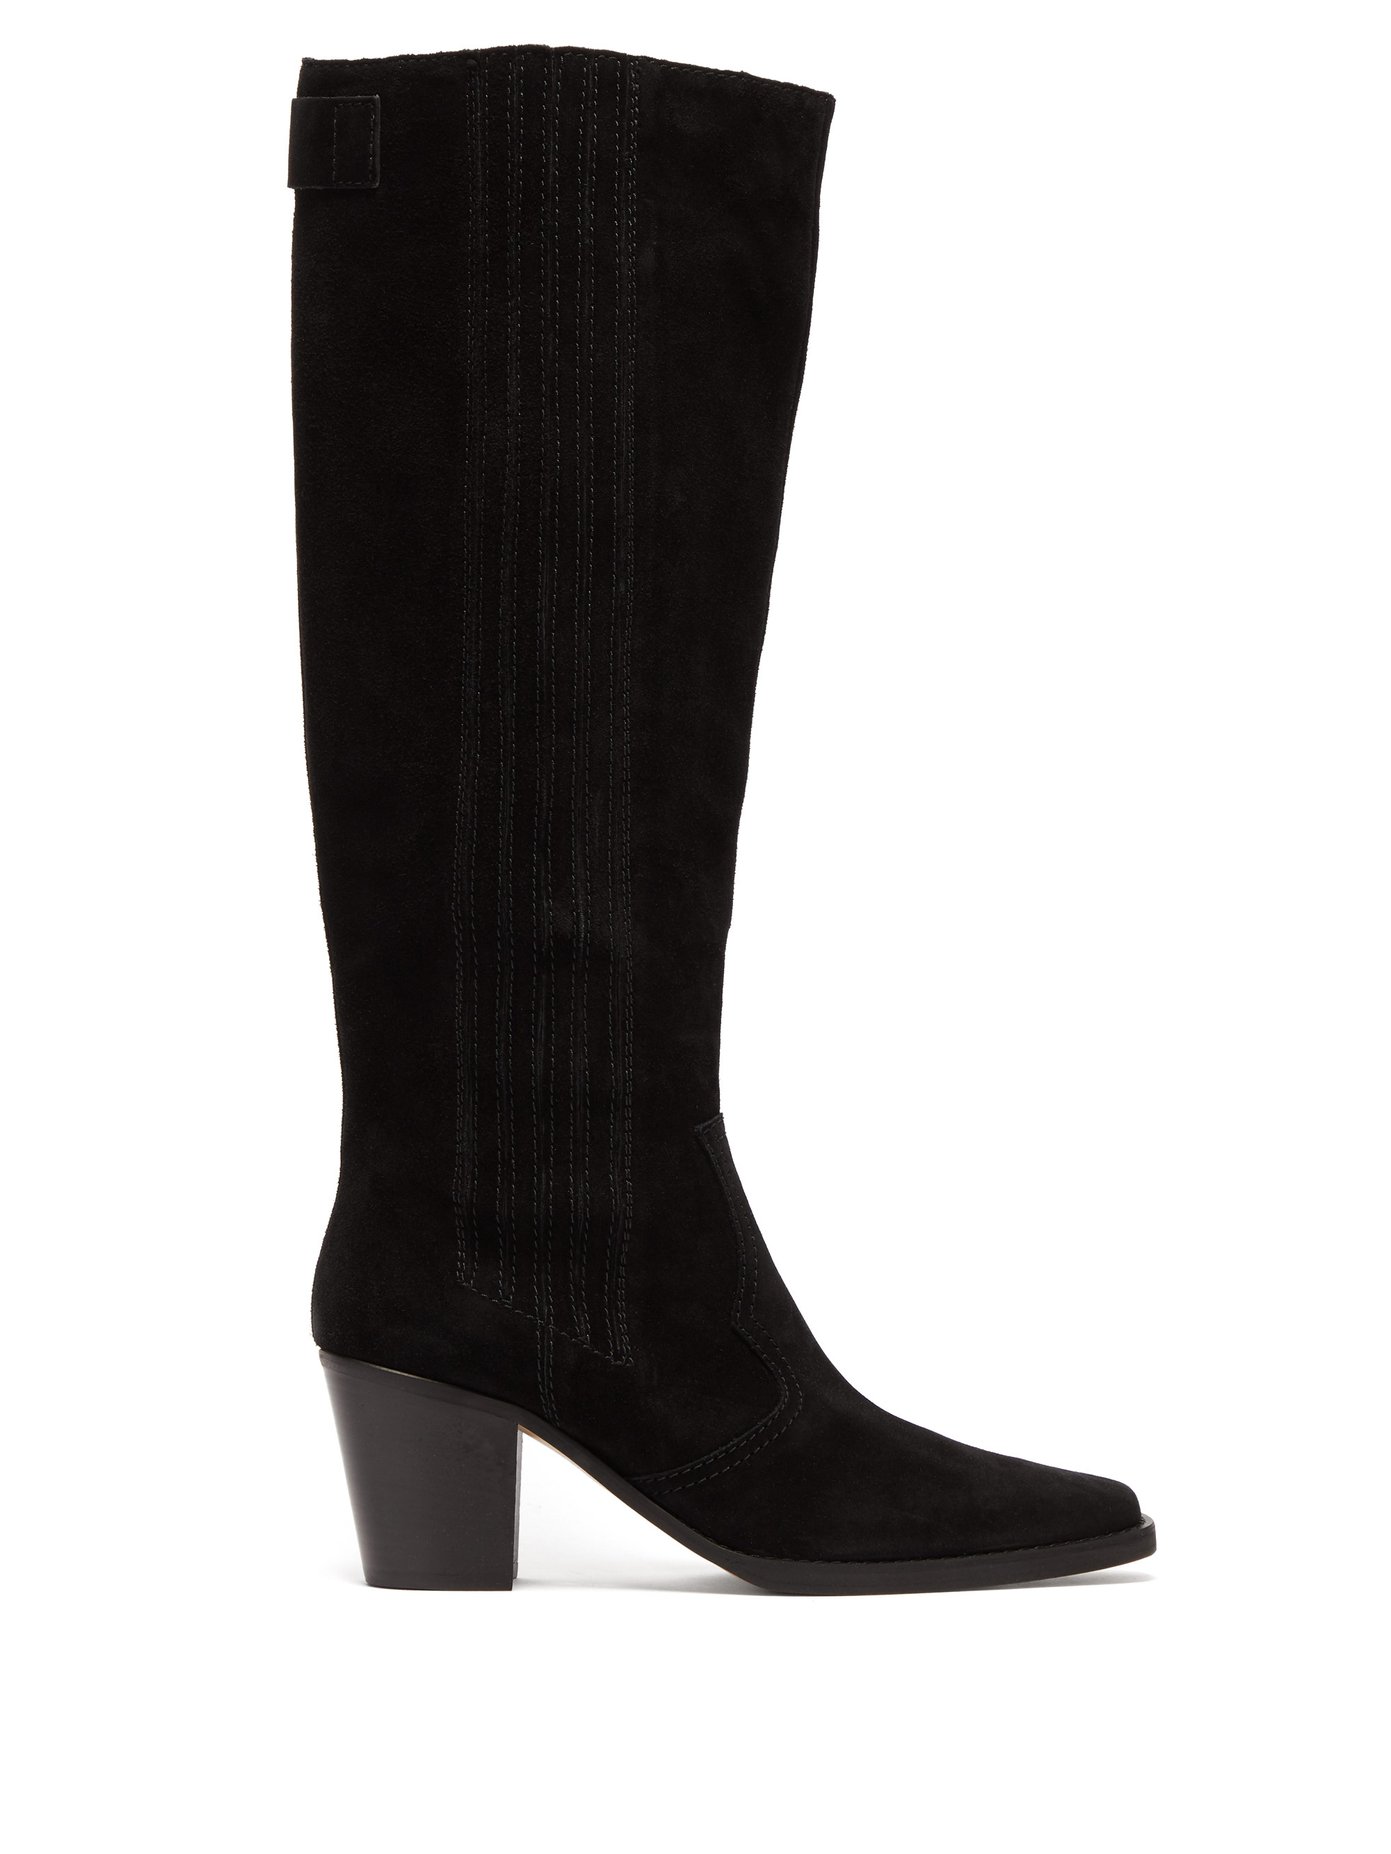 knee high suede boots uk